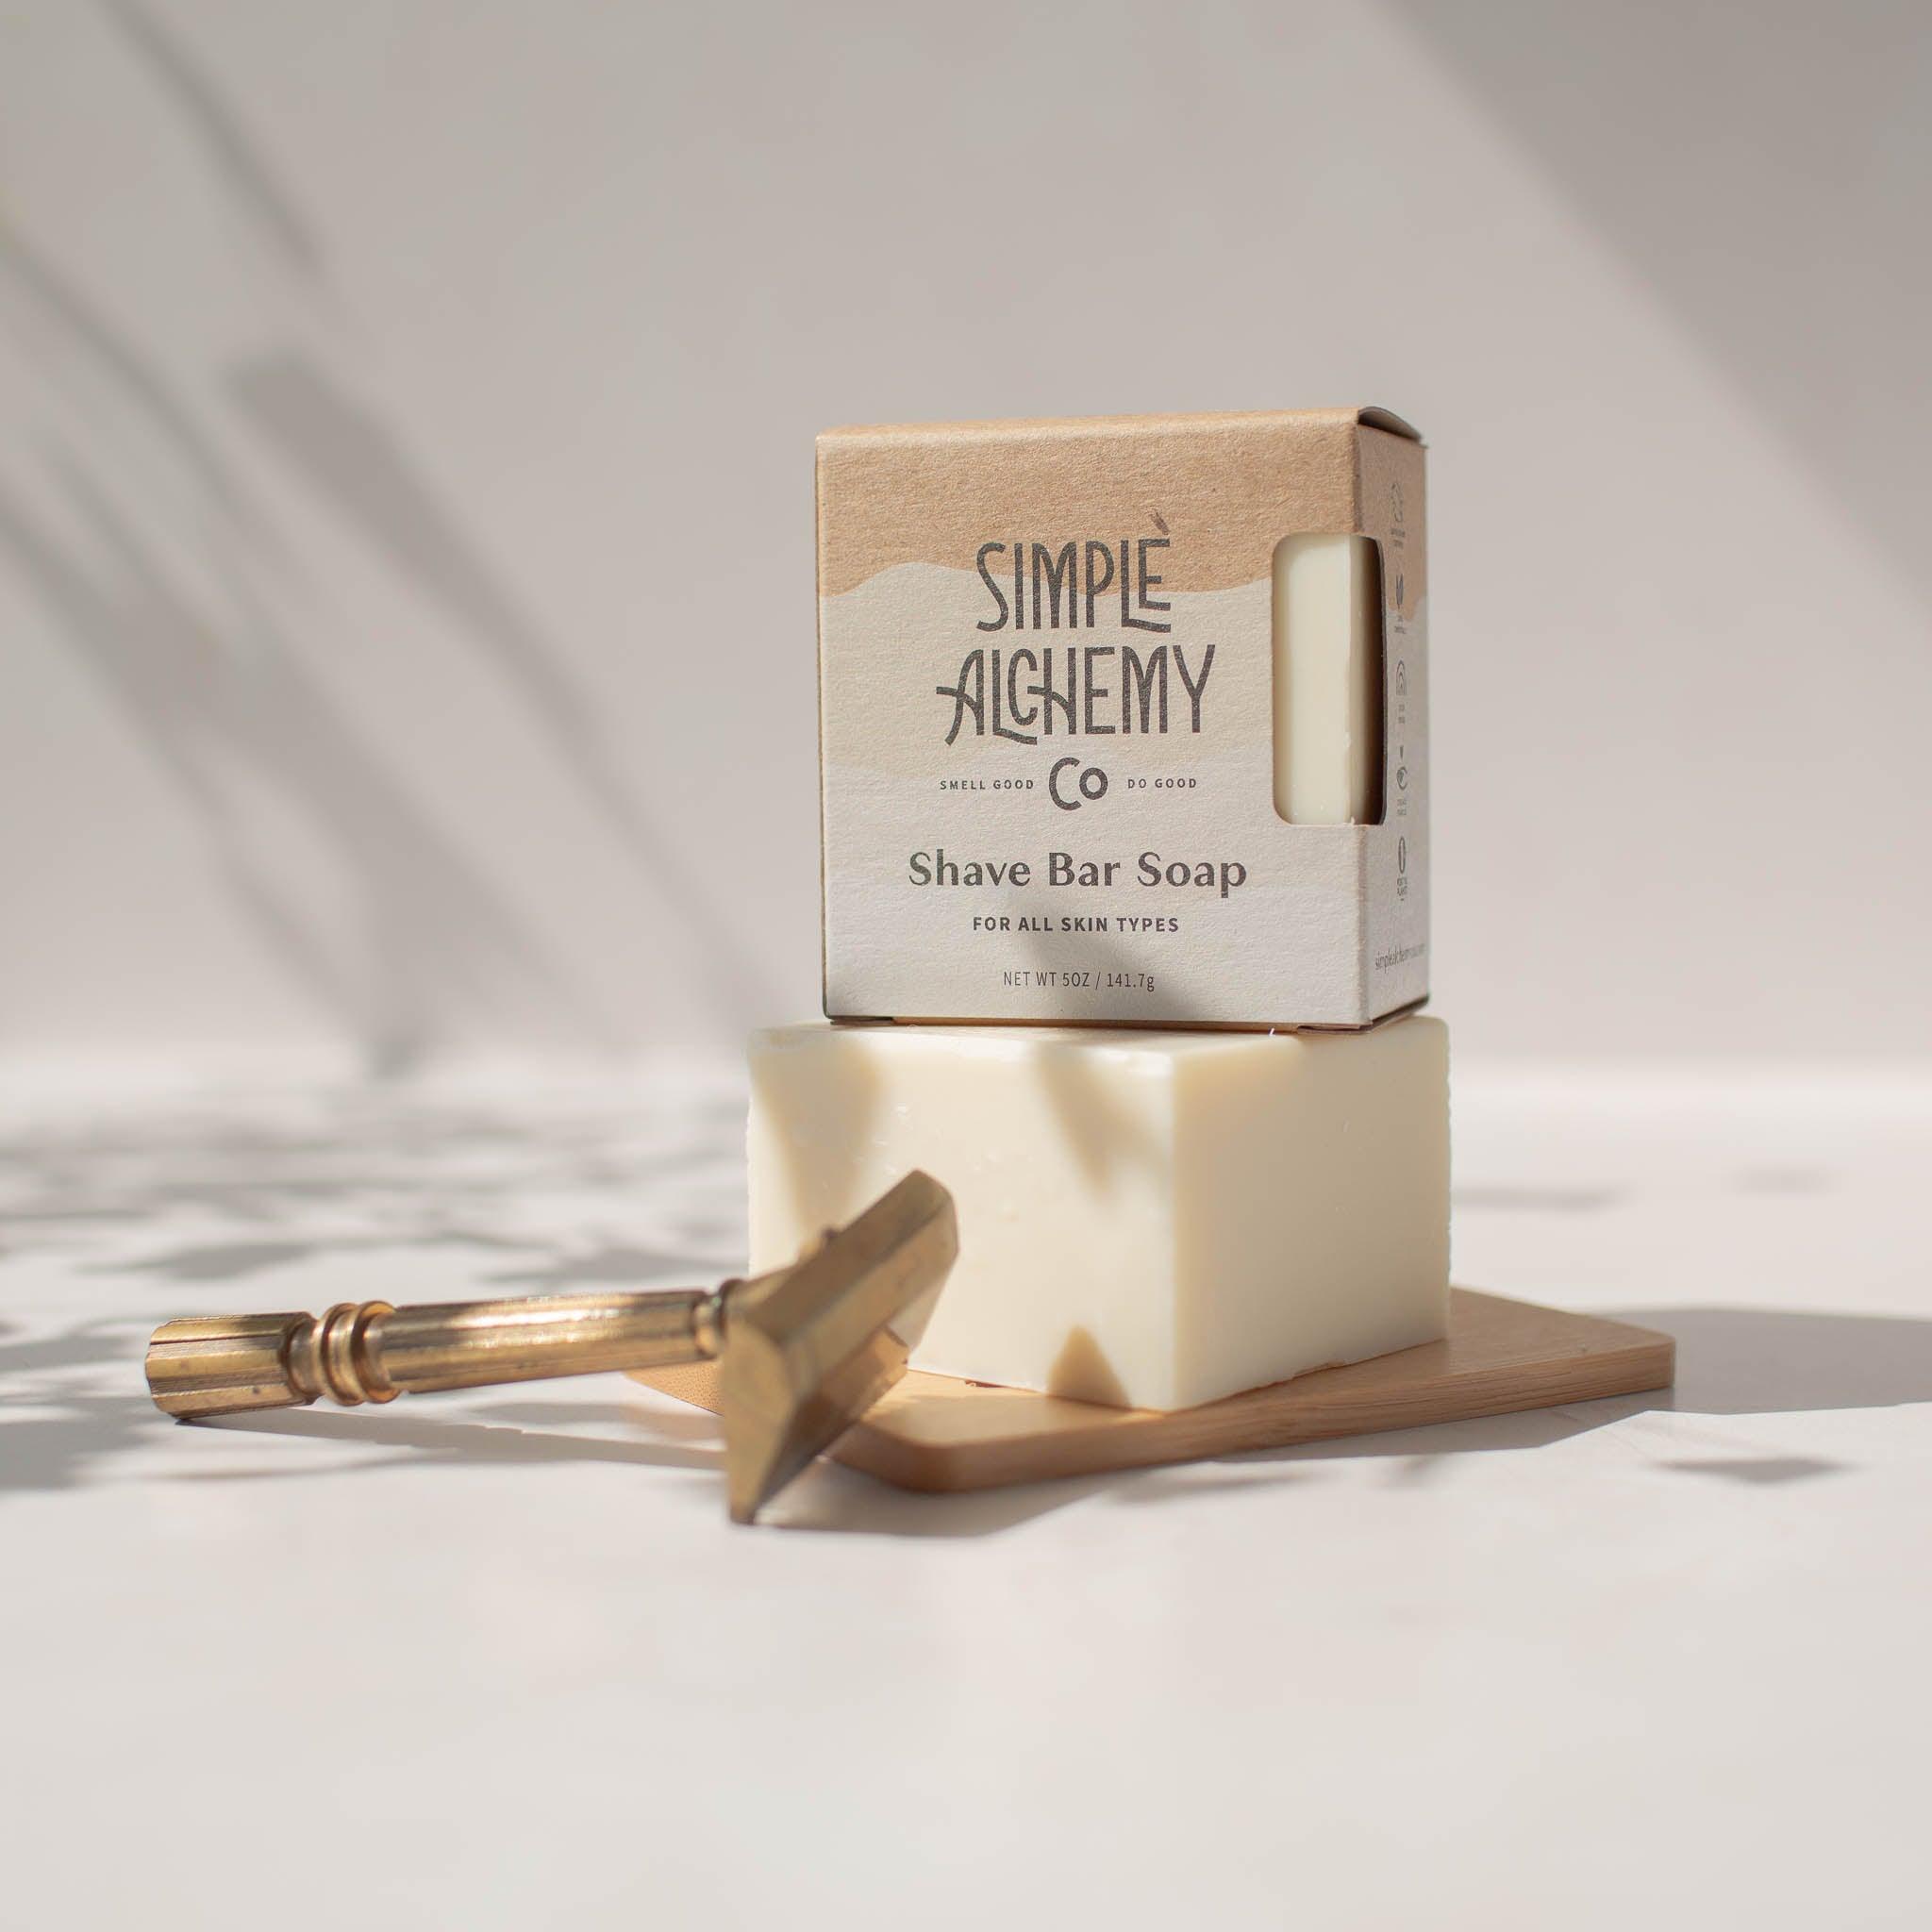 Square, branded box with cutout showing white Shave Bar Soap.